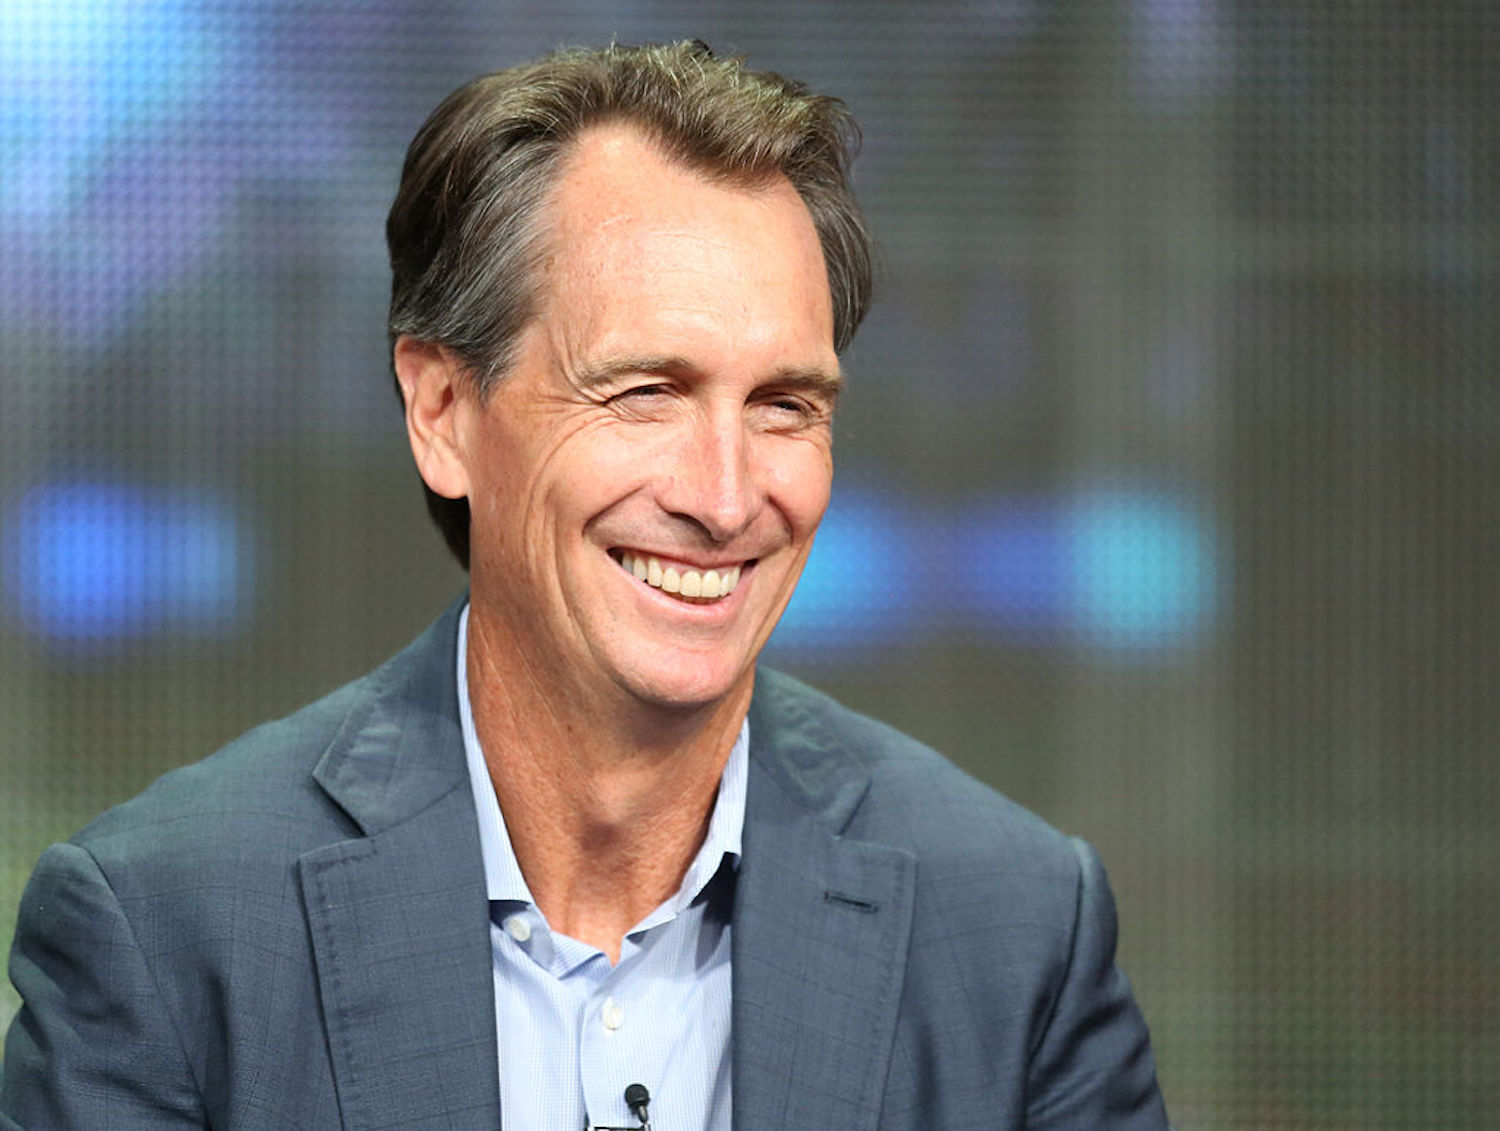 Cris Collinsworth made demeaning comments about female football fans on Wednesday night, and he issued an apology shortly after.